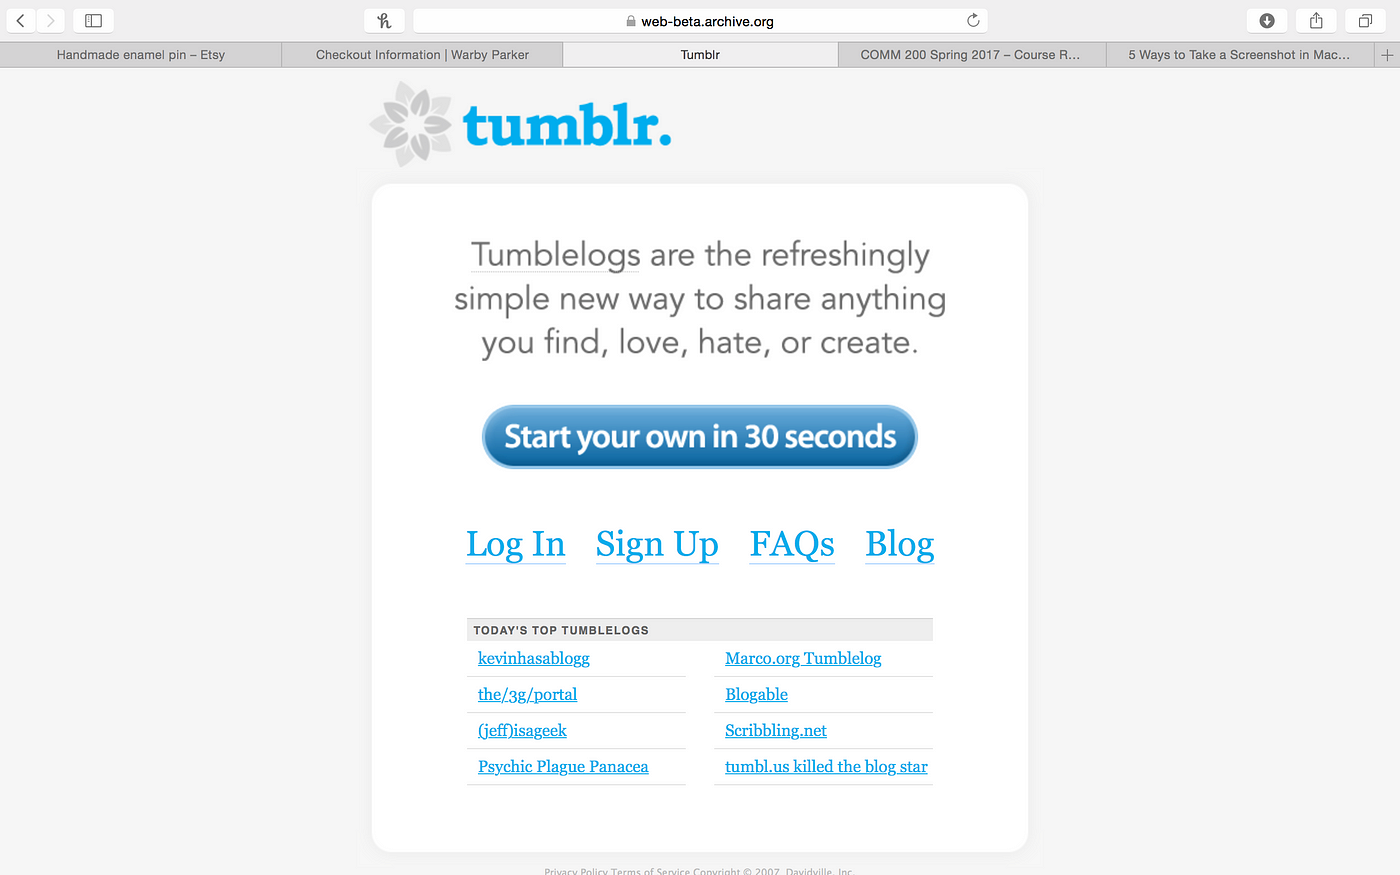 Use tumblr's signup form to login